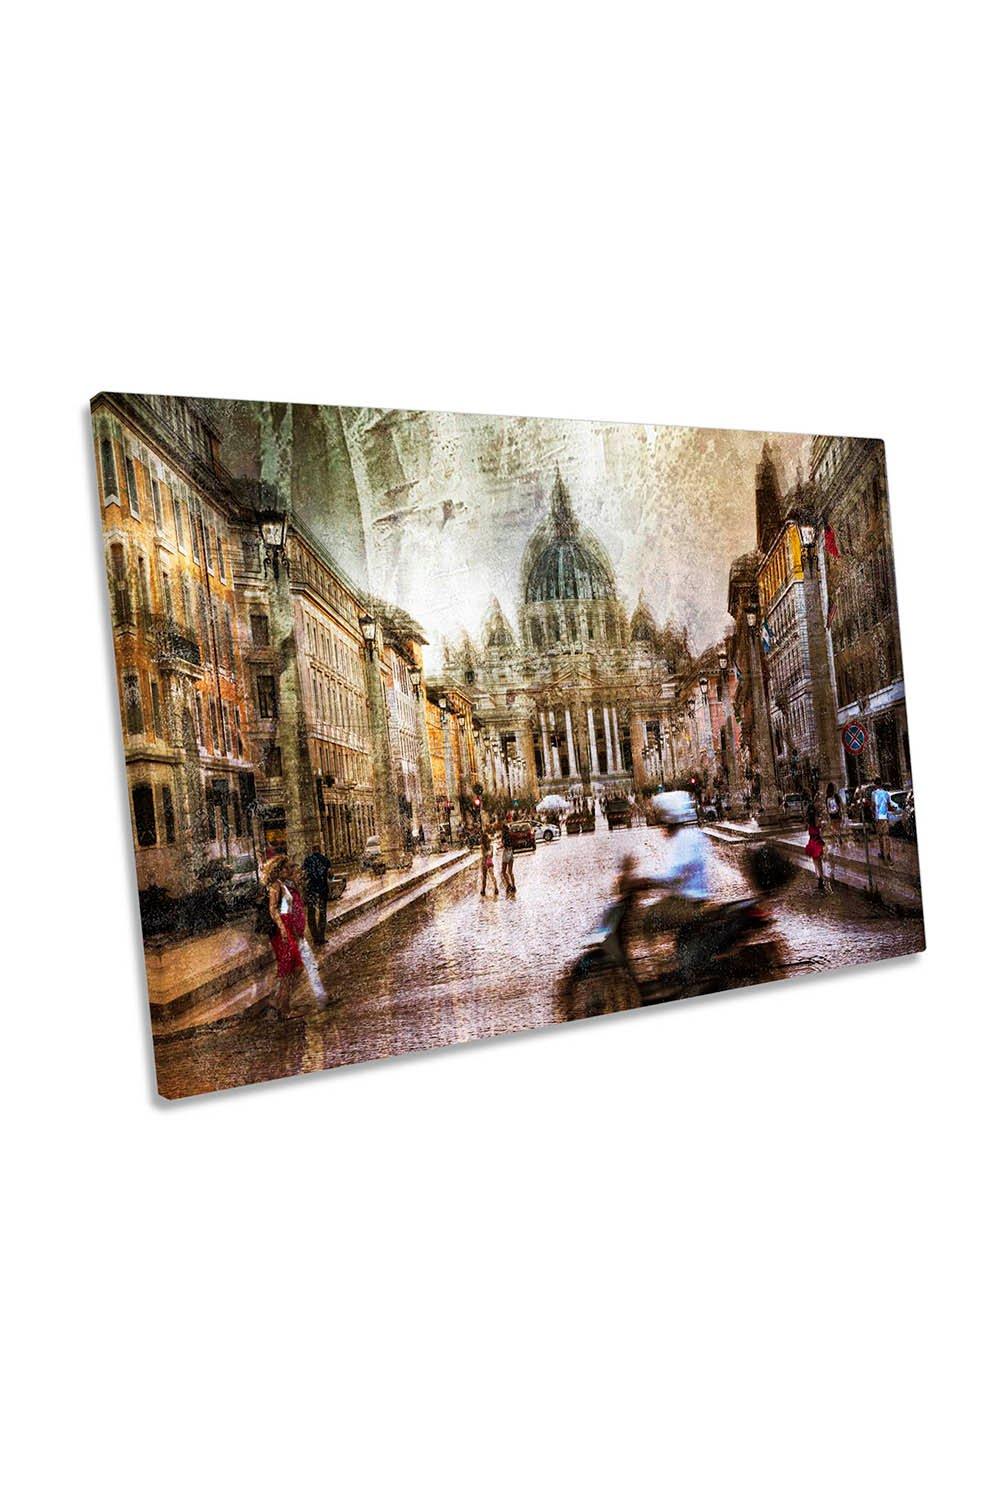 Basilica of Saint Peter Rome Abstract Canvas Wall Art Picture Print